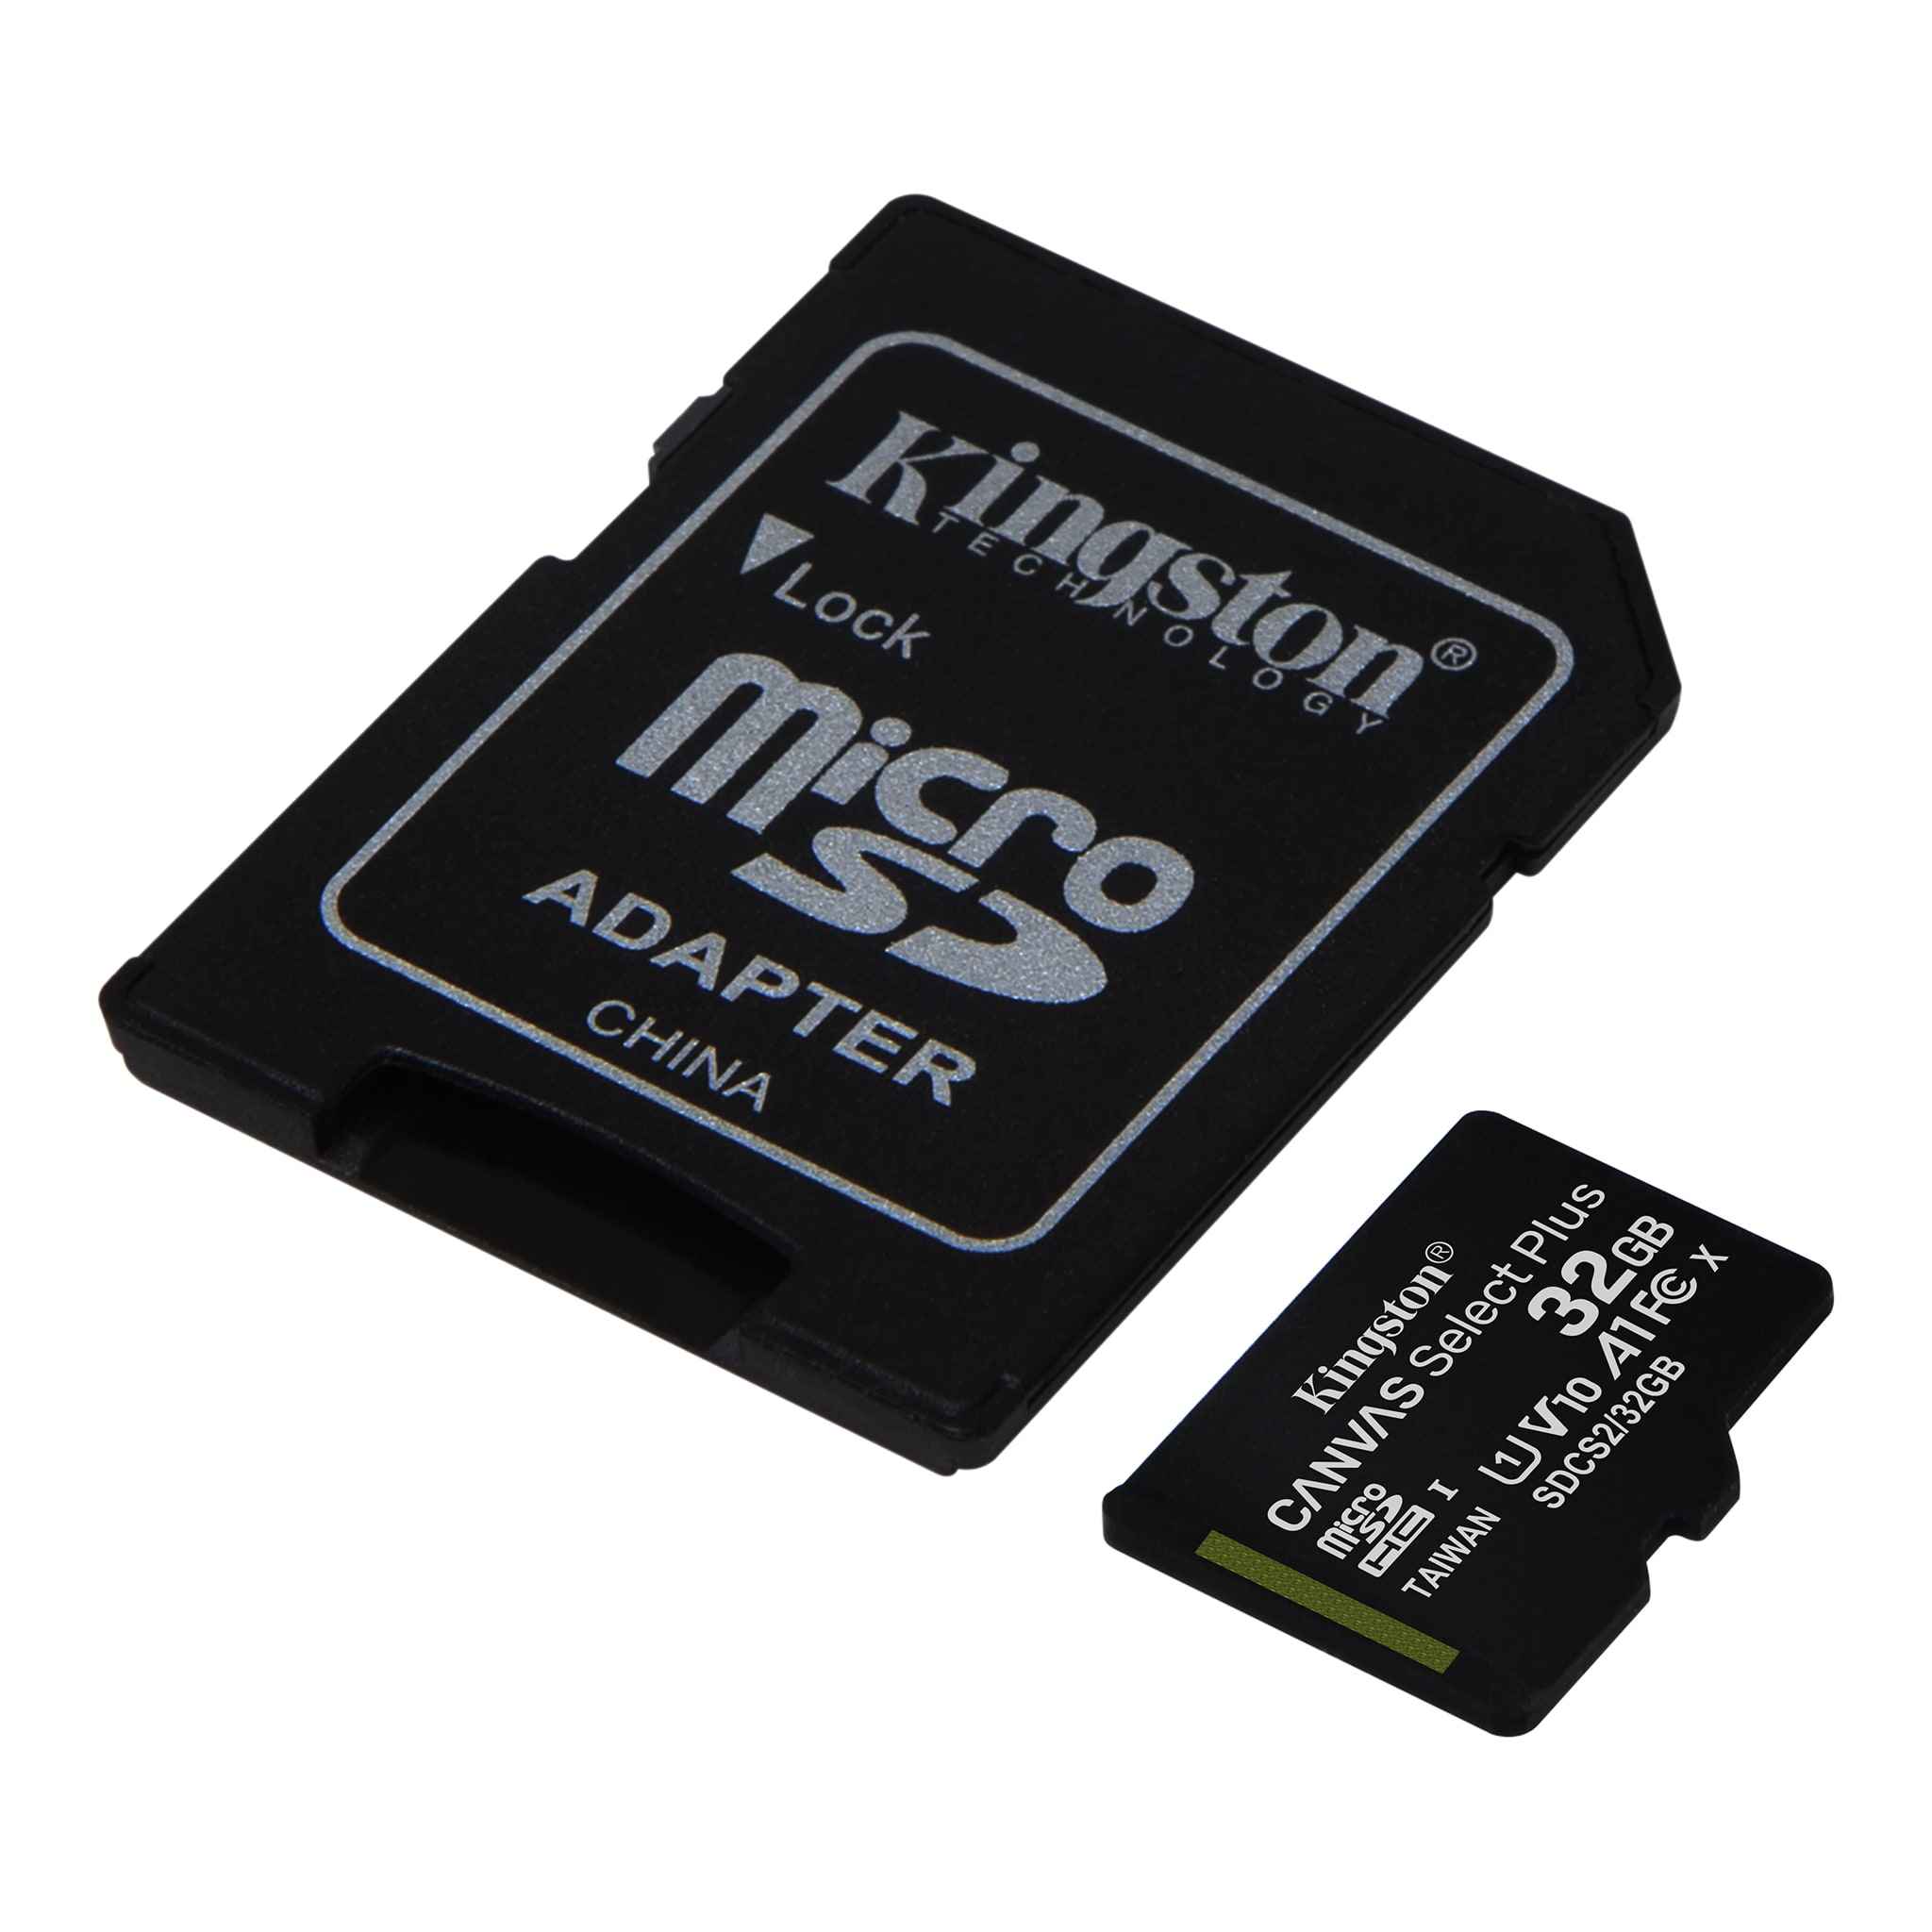 100MBs Works with Kingston Kingston 64GB Kyocera Hydro Shore MicroSDXC Canvas Select Plus Card Verified by SanFlash. 